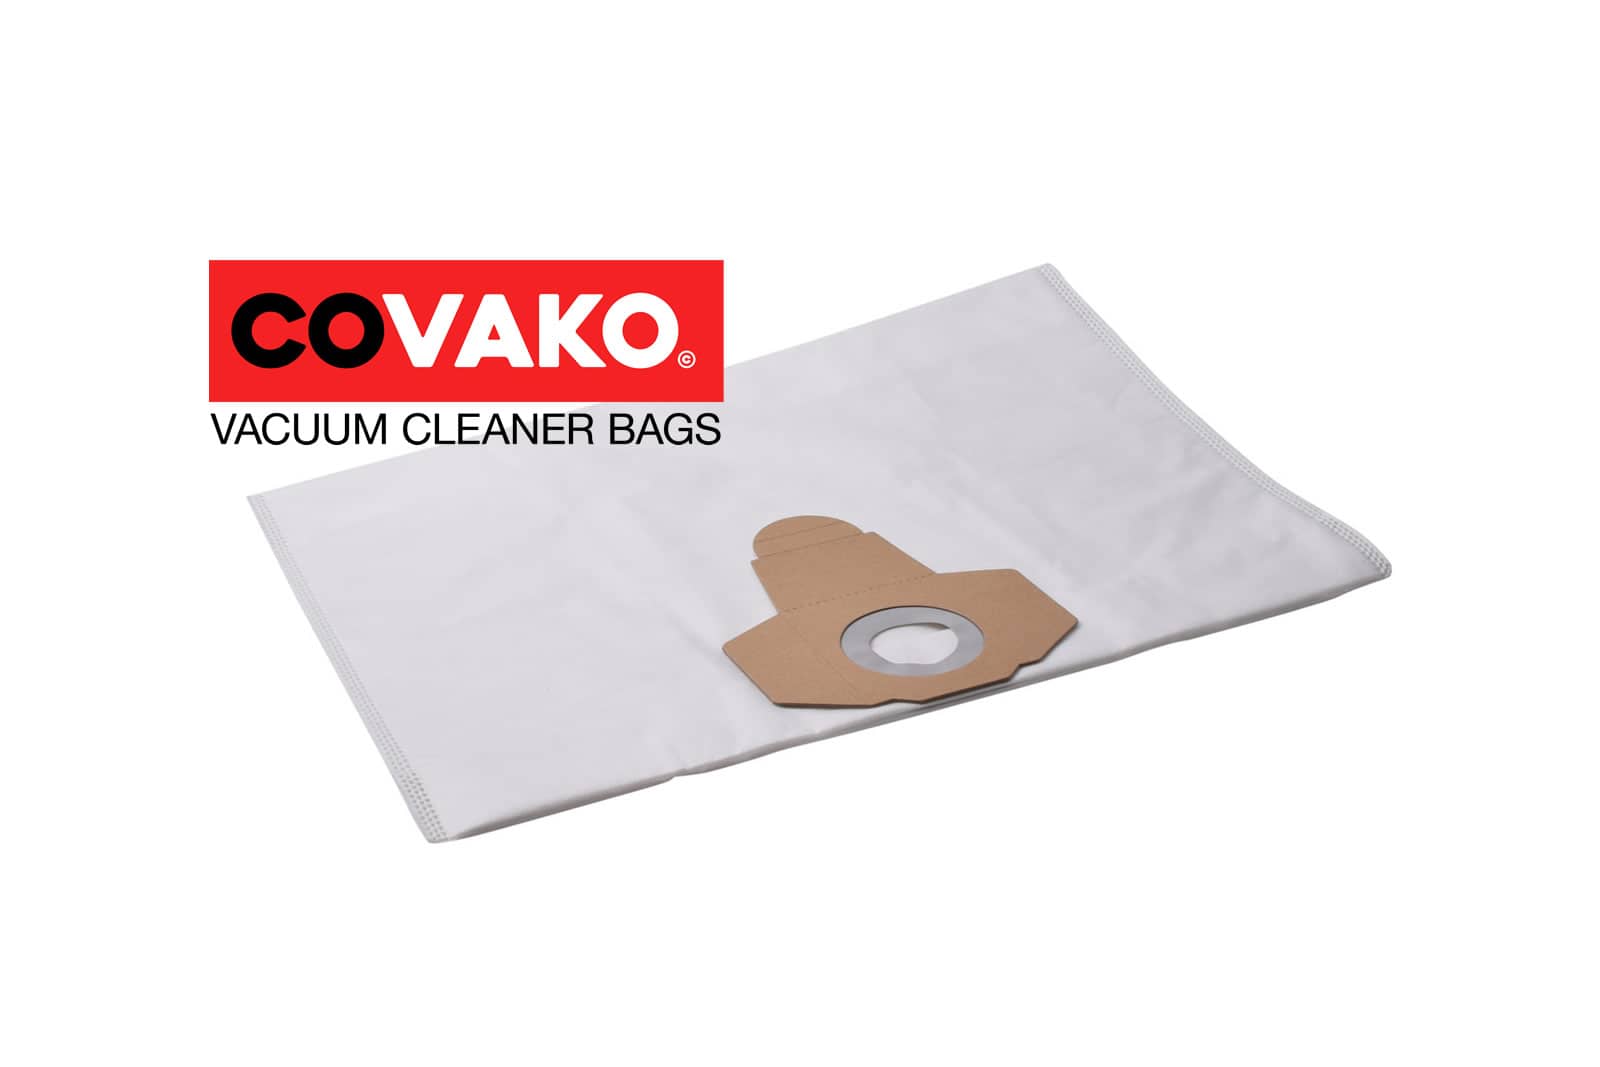 ewt Boxter 15 S / Synthesis - ewt vacuum cleaner bags